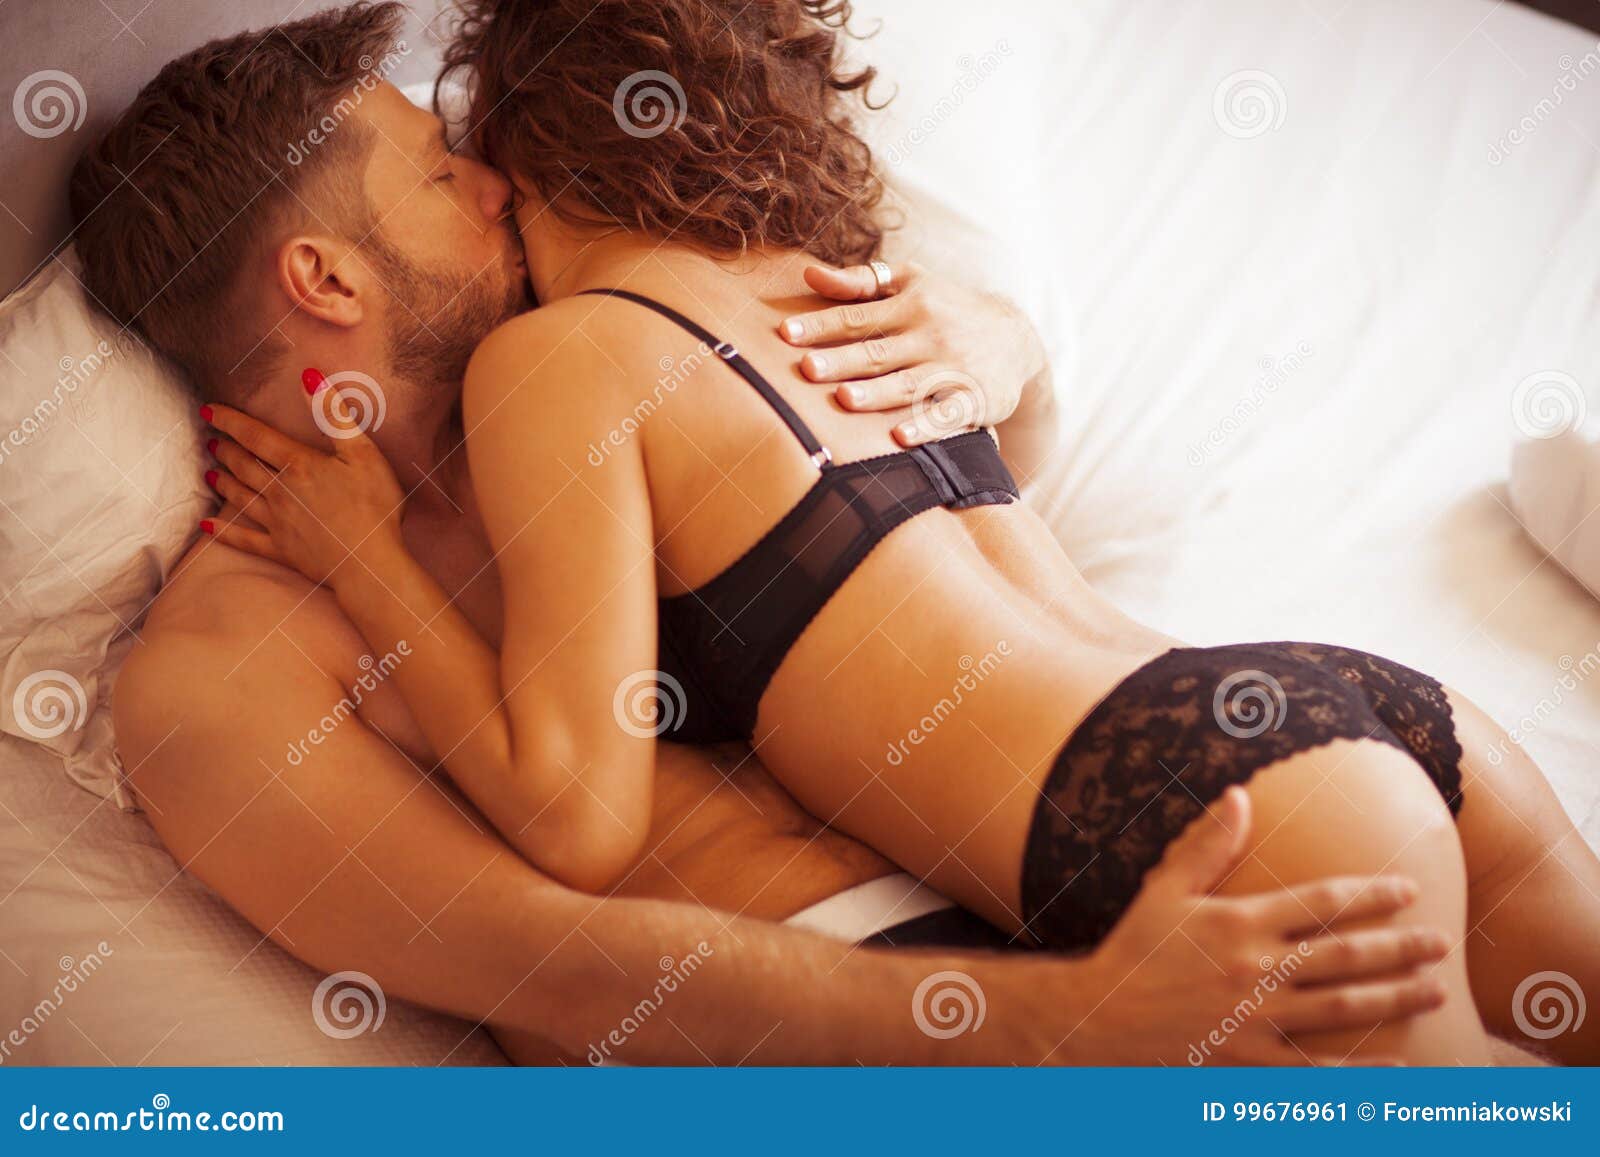 Images Of Couples Making Love word sex